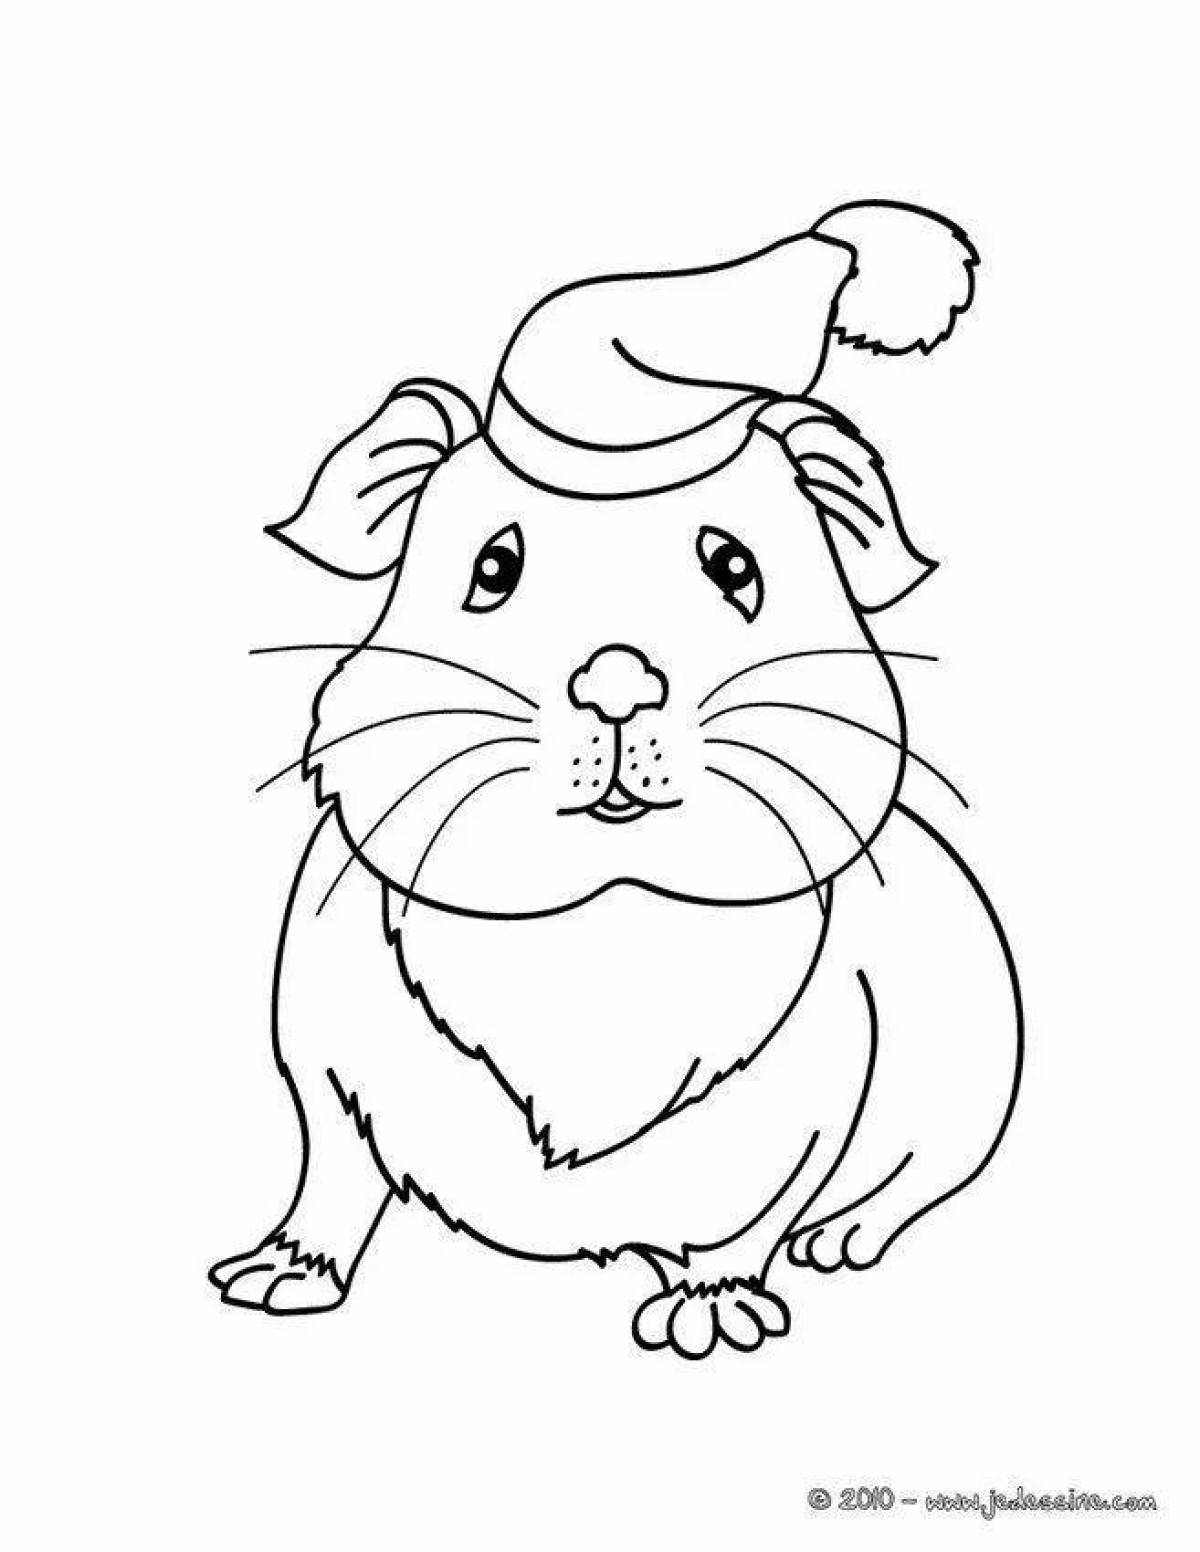 Furry pet coloring pages